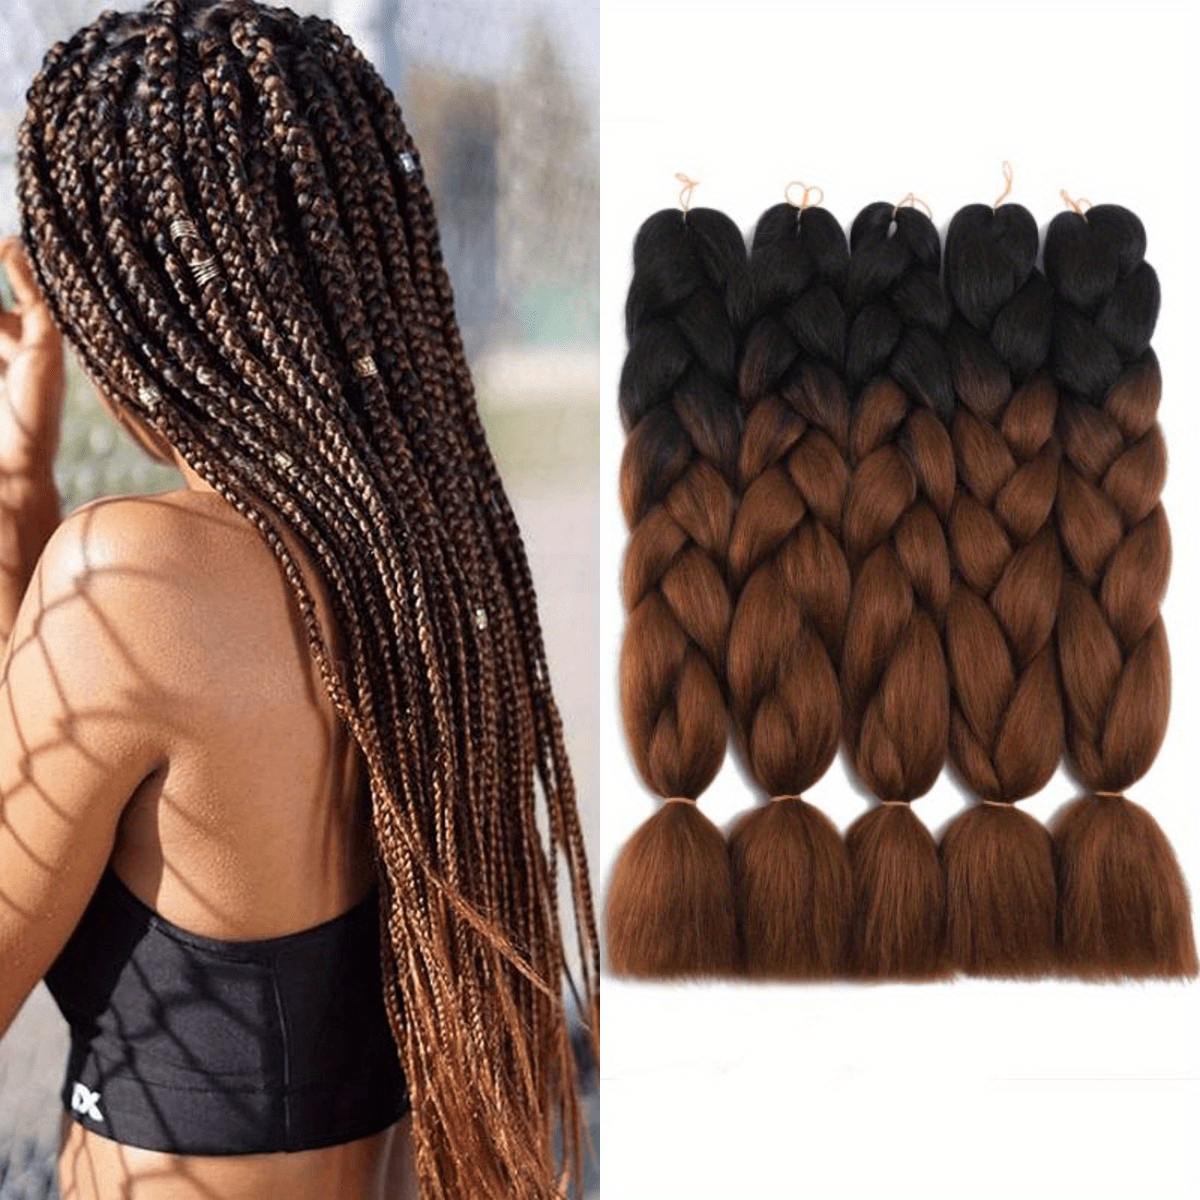 Rainbow Ombre Synthetic Braiding Xpression Braiding Hair Extension